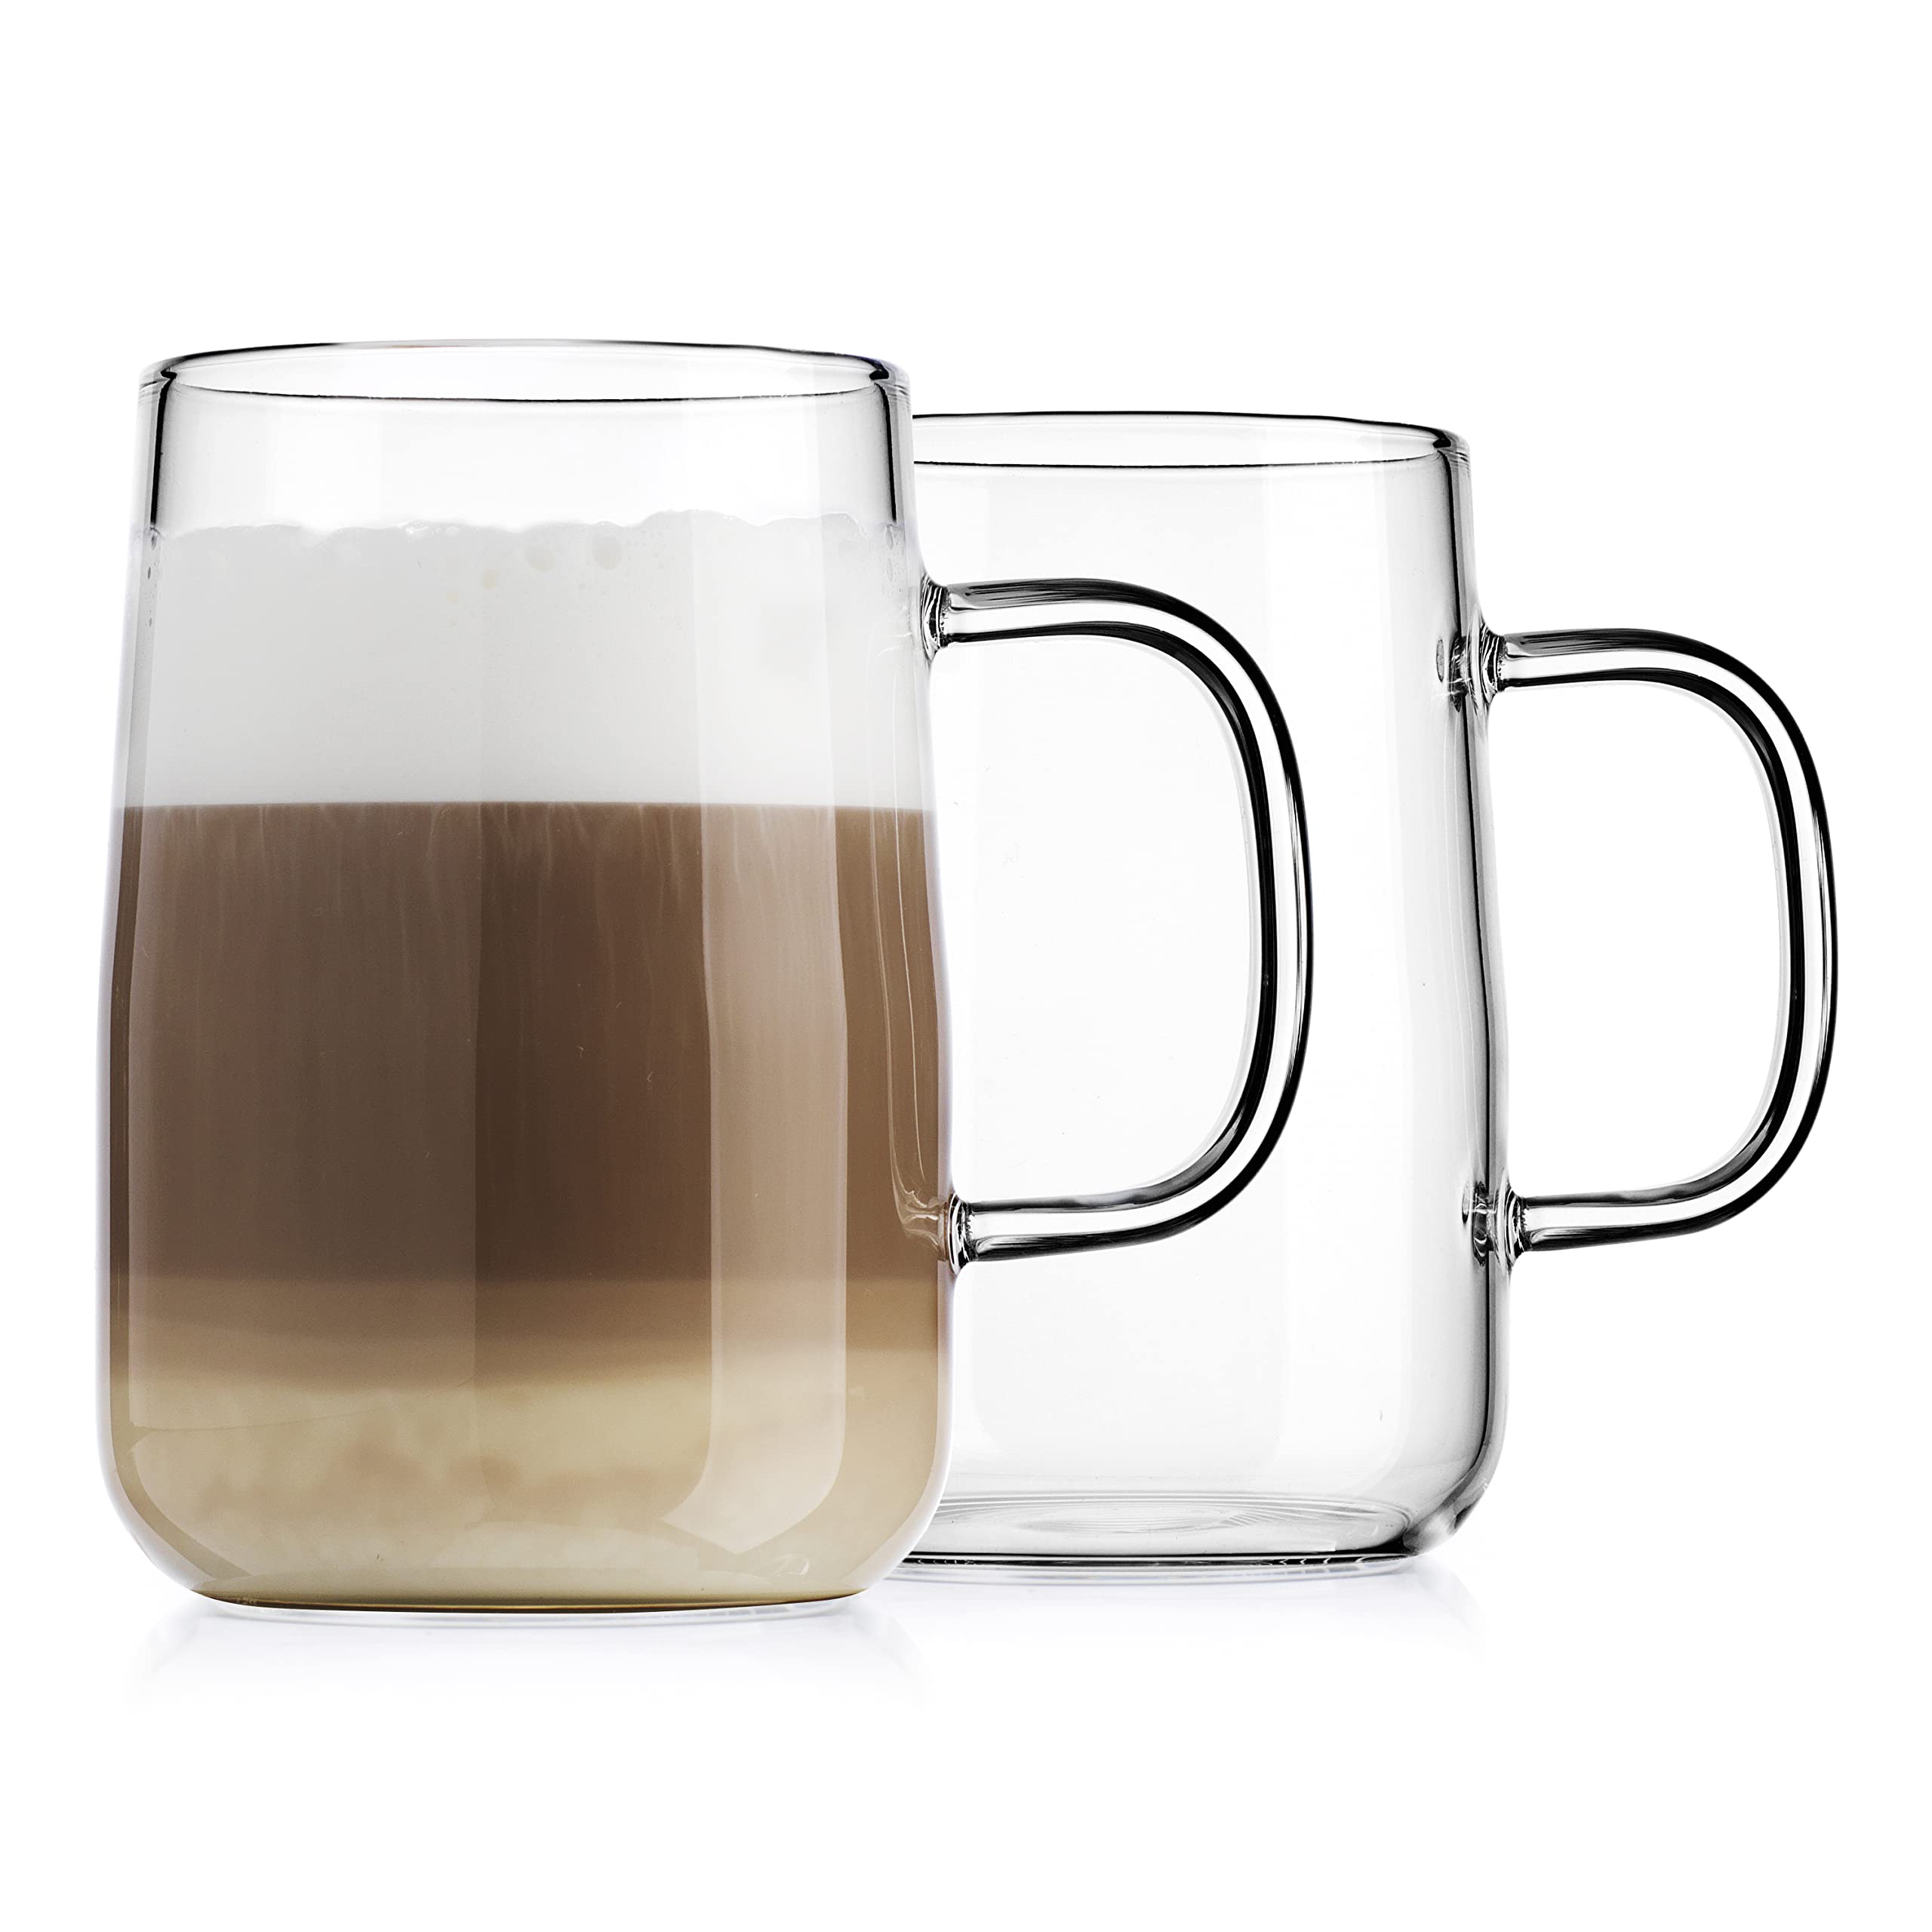 Glaver's Set of 2 Classic Coffee Mugs � Clear Coffee Cups for Espresso, Mocha, Cappuccino, Tea � 18 Oz Coffee Mugs With Handle for Steady Grip �Ideal for Any Modern Kitchen, Bar, Pub  - Like New